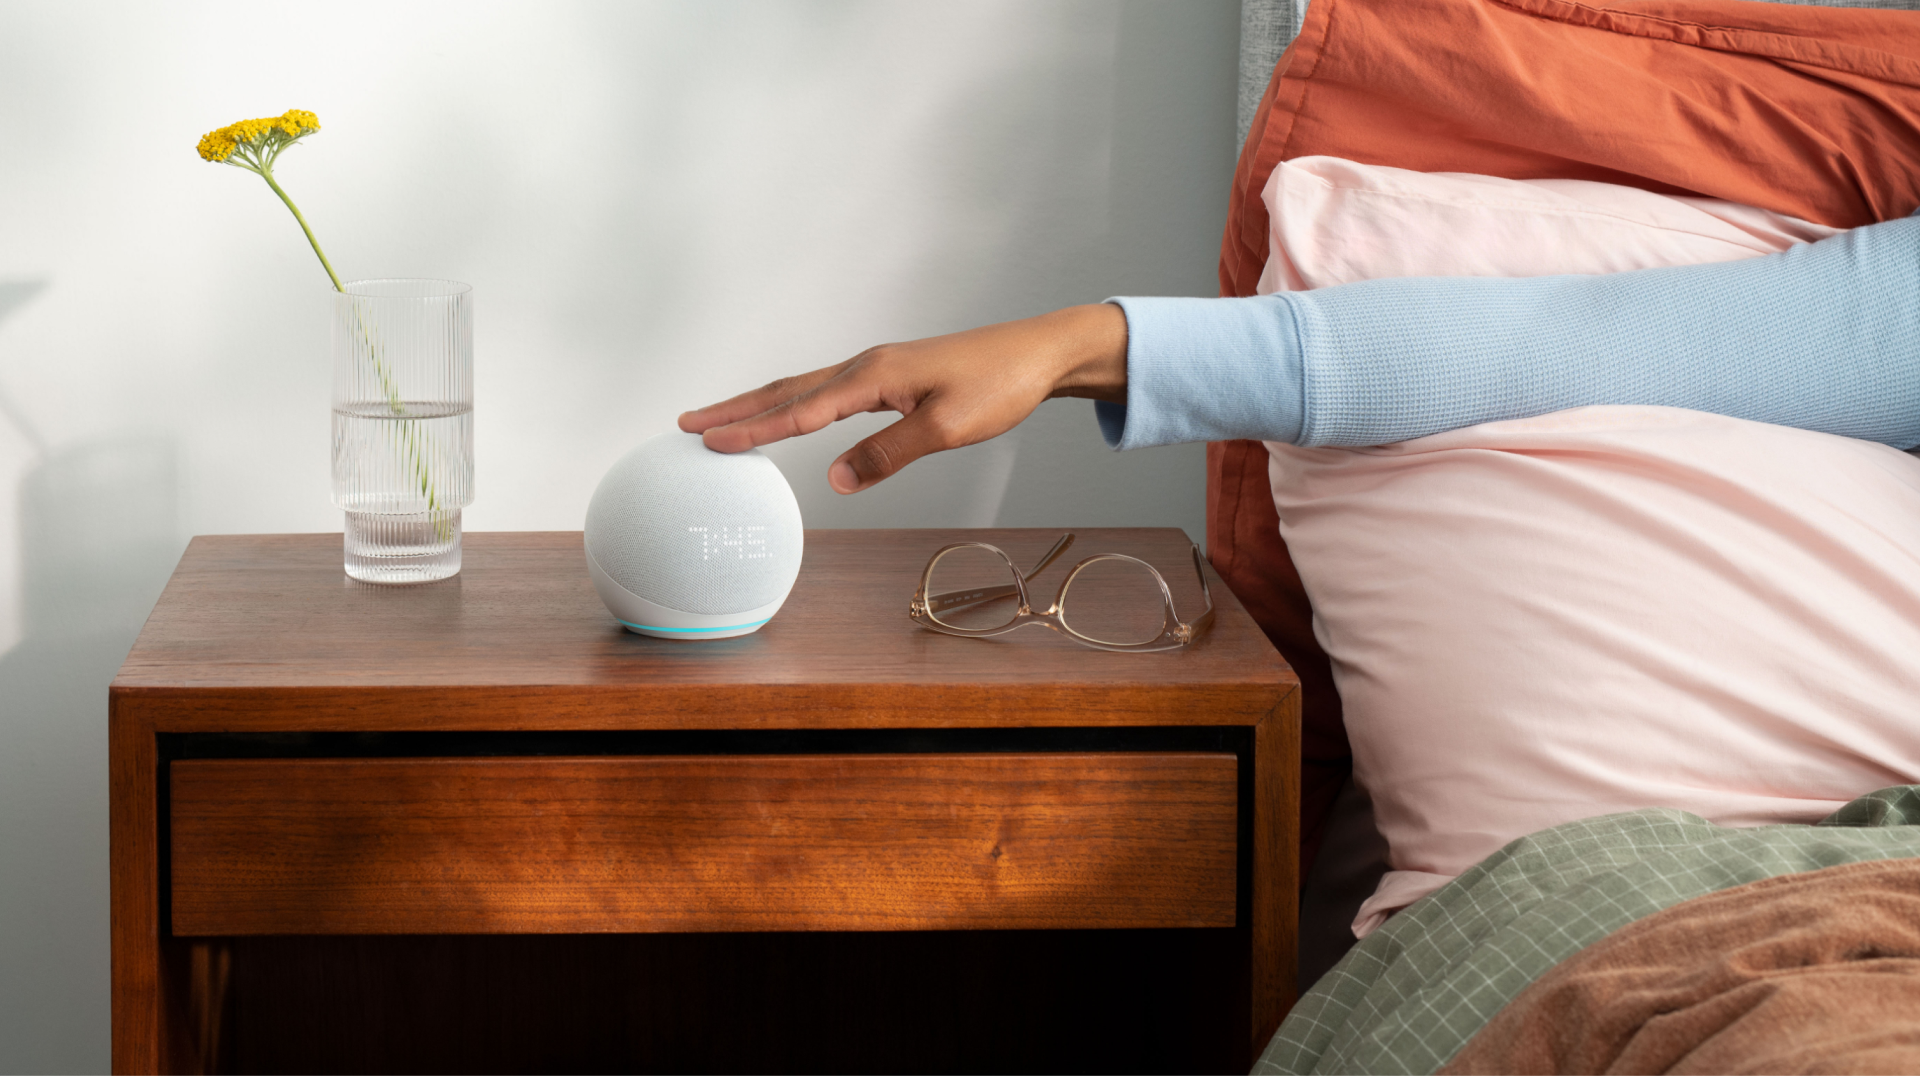 With Amazon’s latest Echo updates, Google’s Nest speakers have some serious catching up to do